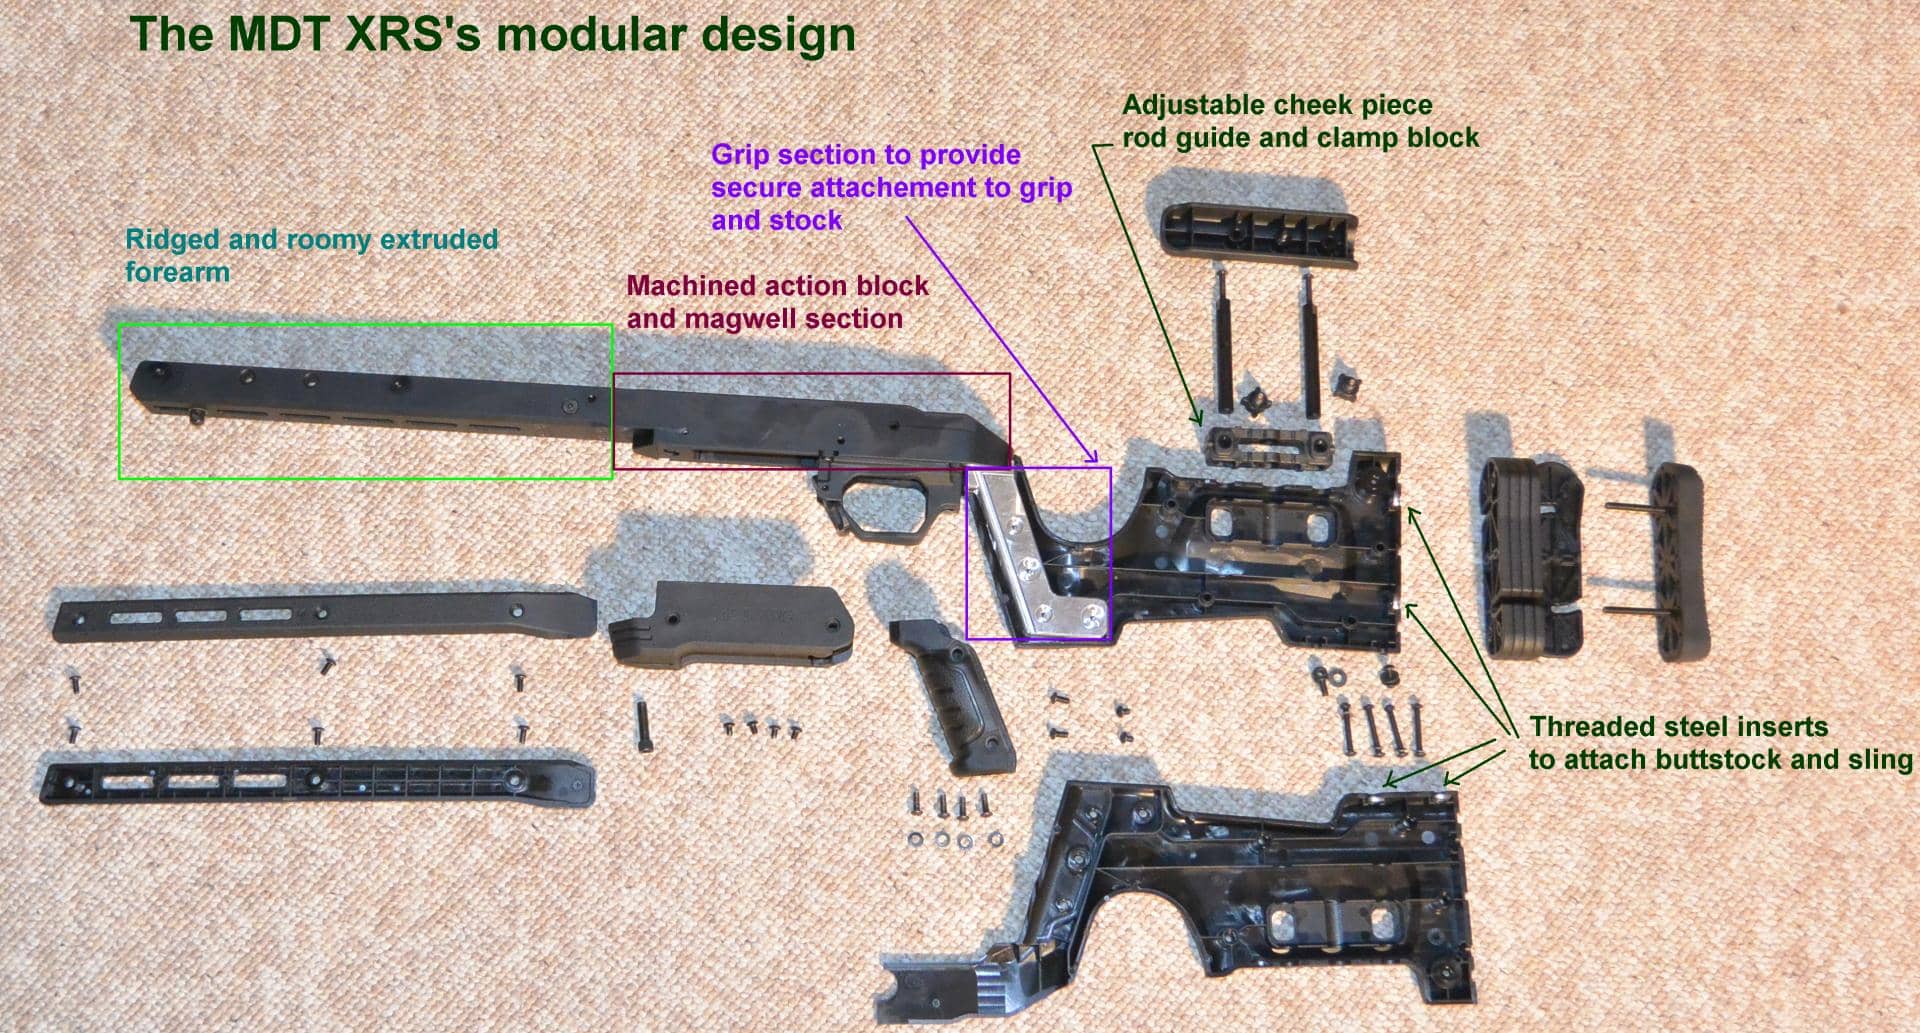 The MDT XRS stripped of its skin with section labels